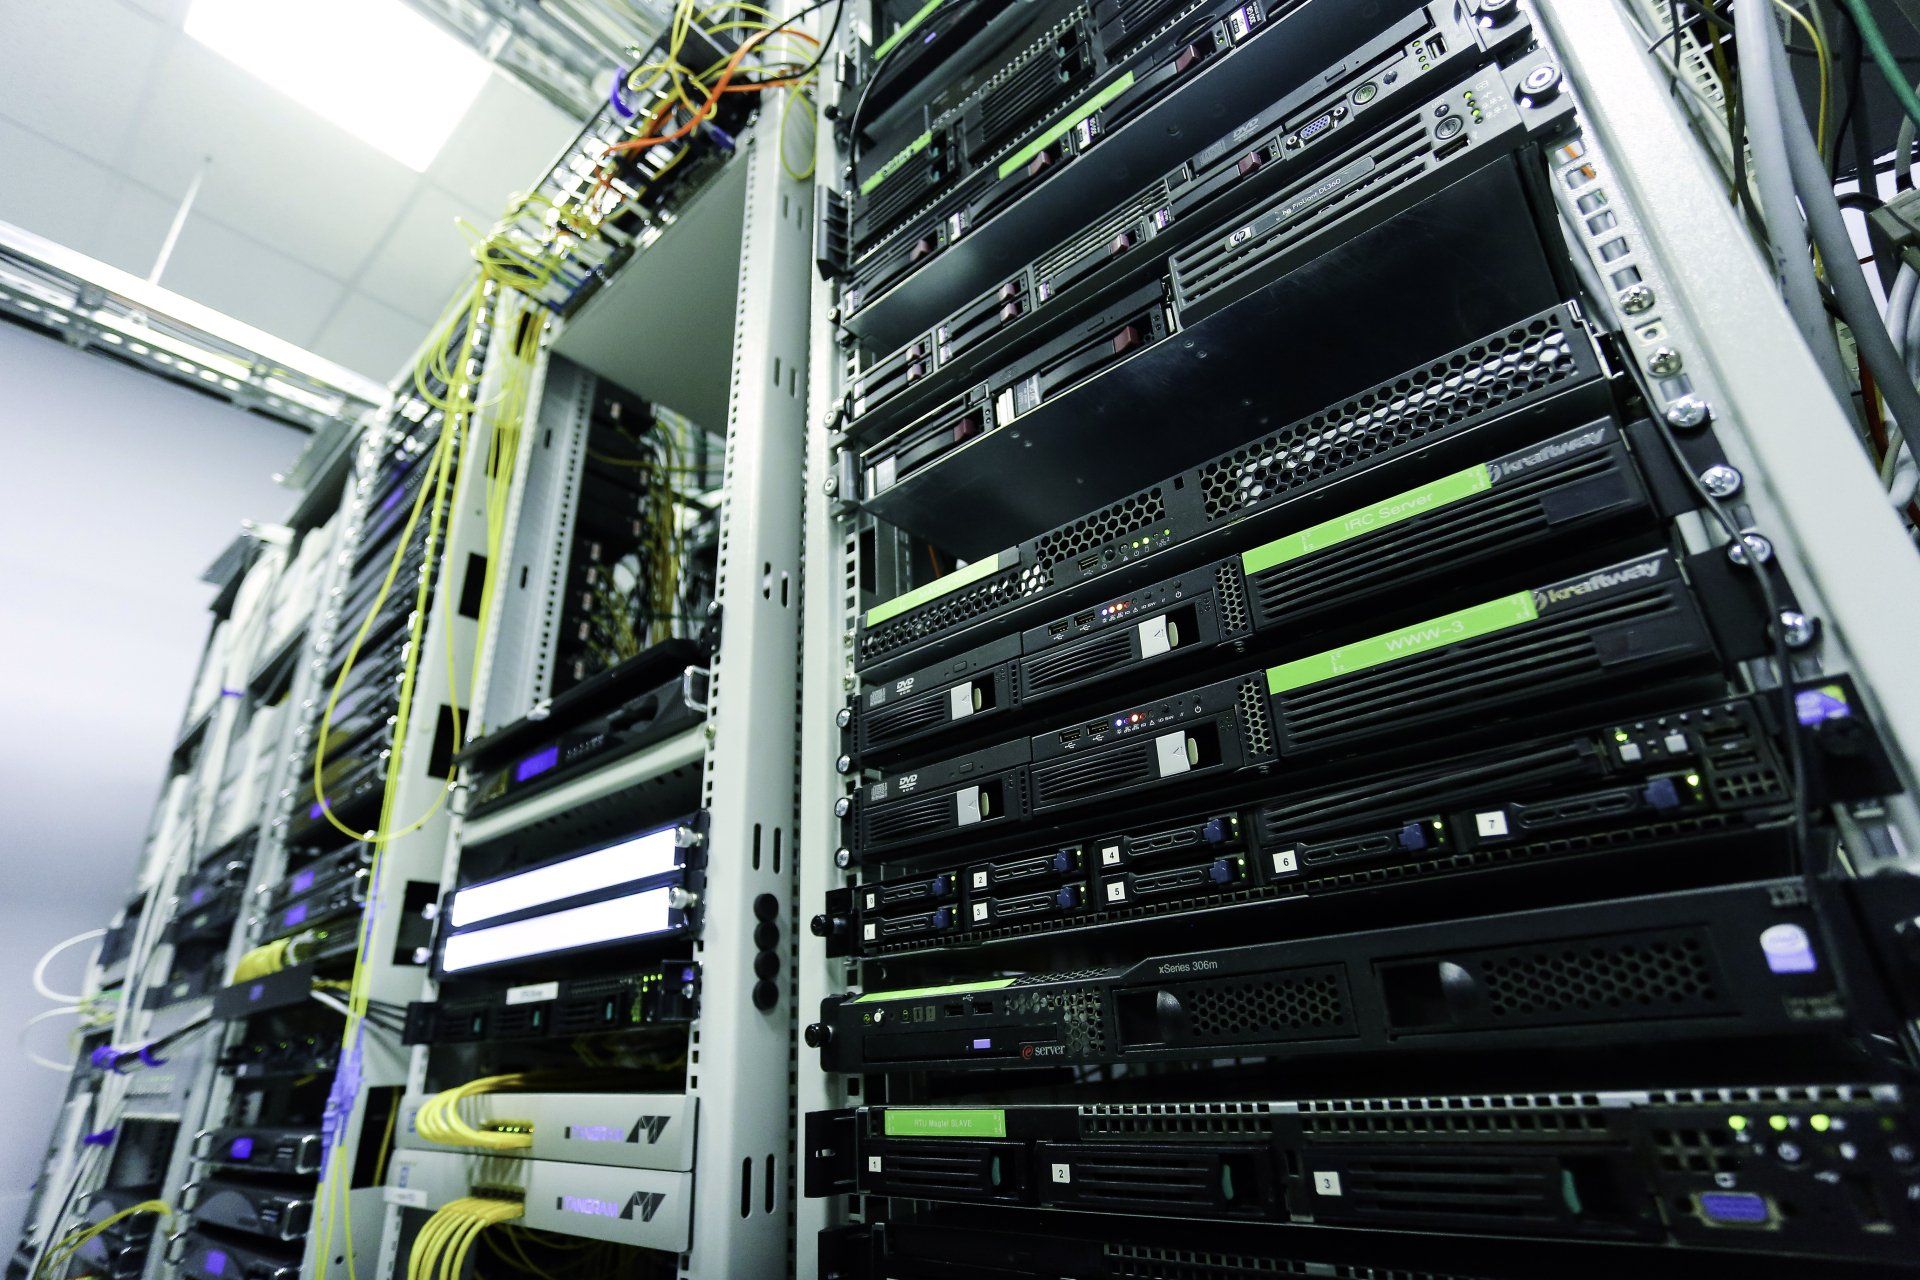 A bunch of servers are stacked on top of each other in a server room.